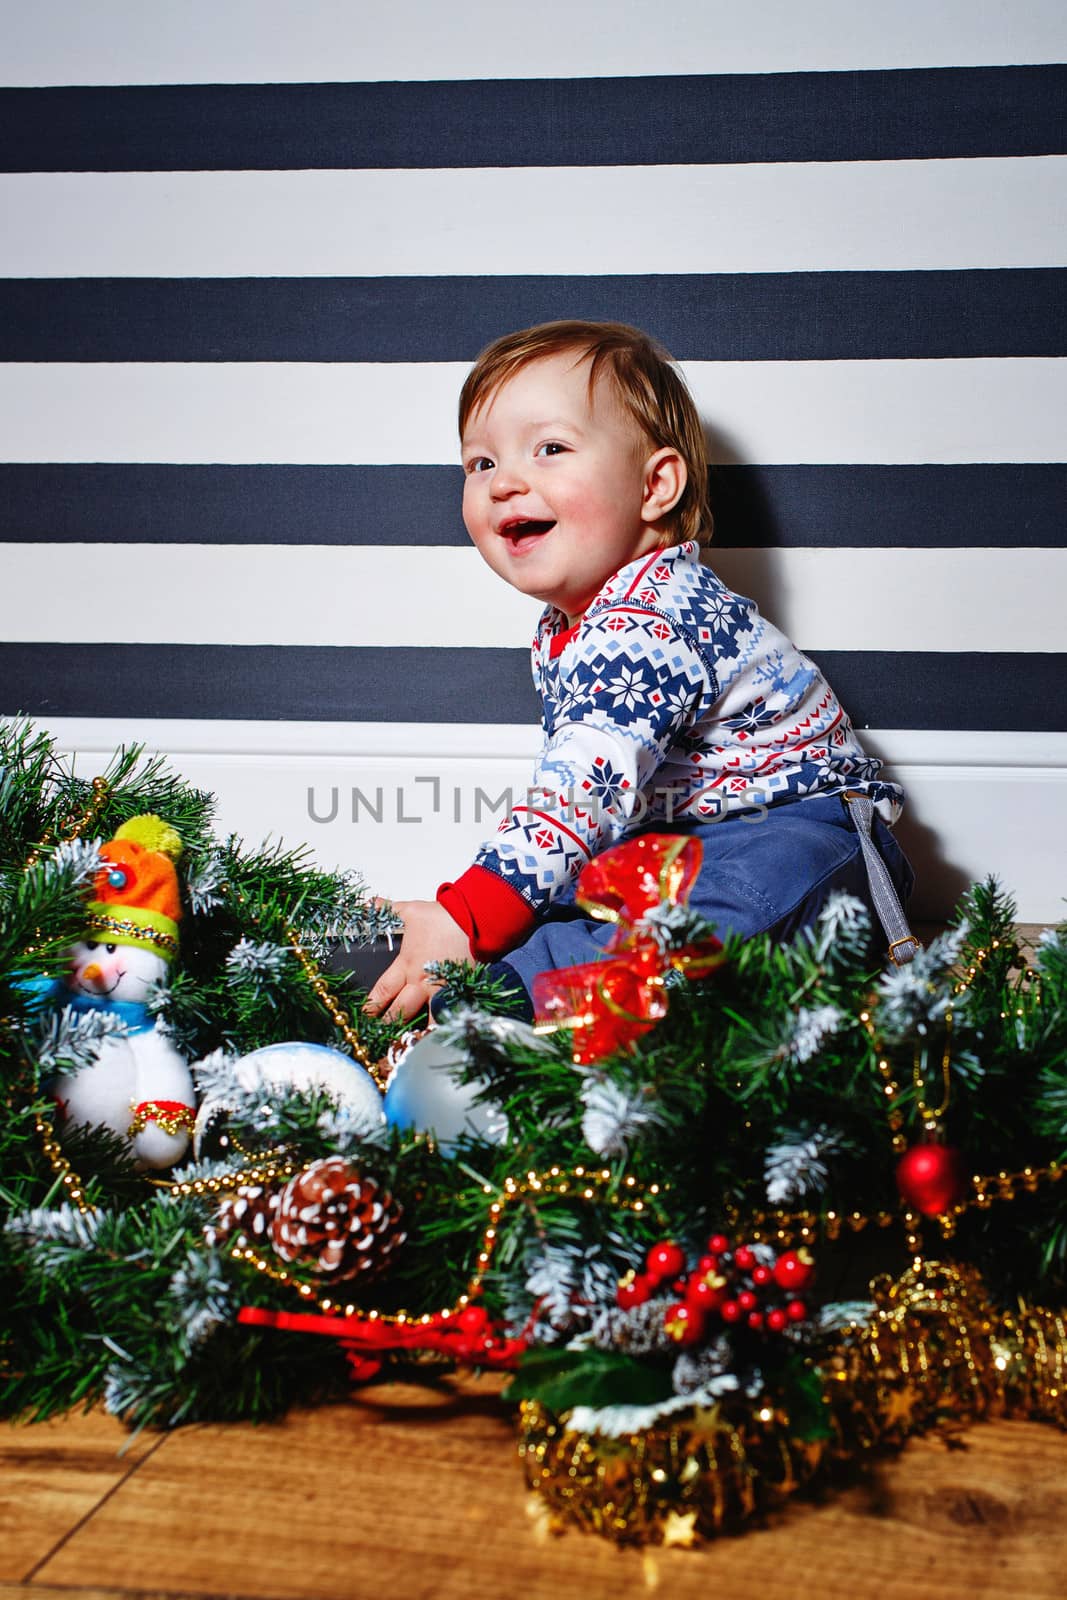 Little boy sitting on the floor surrounded by Christmas decorations